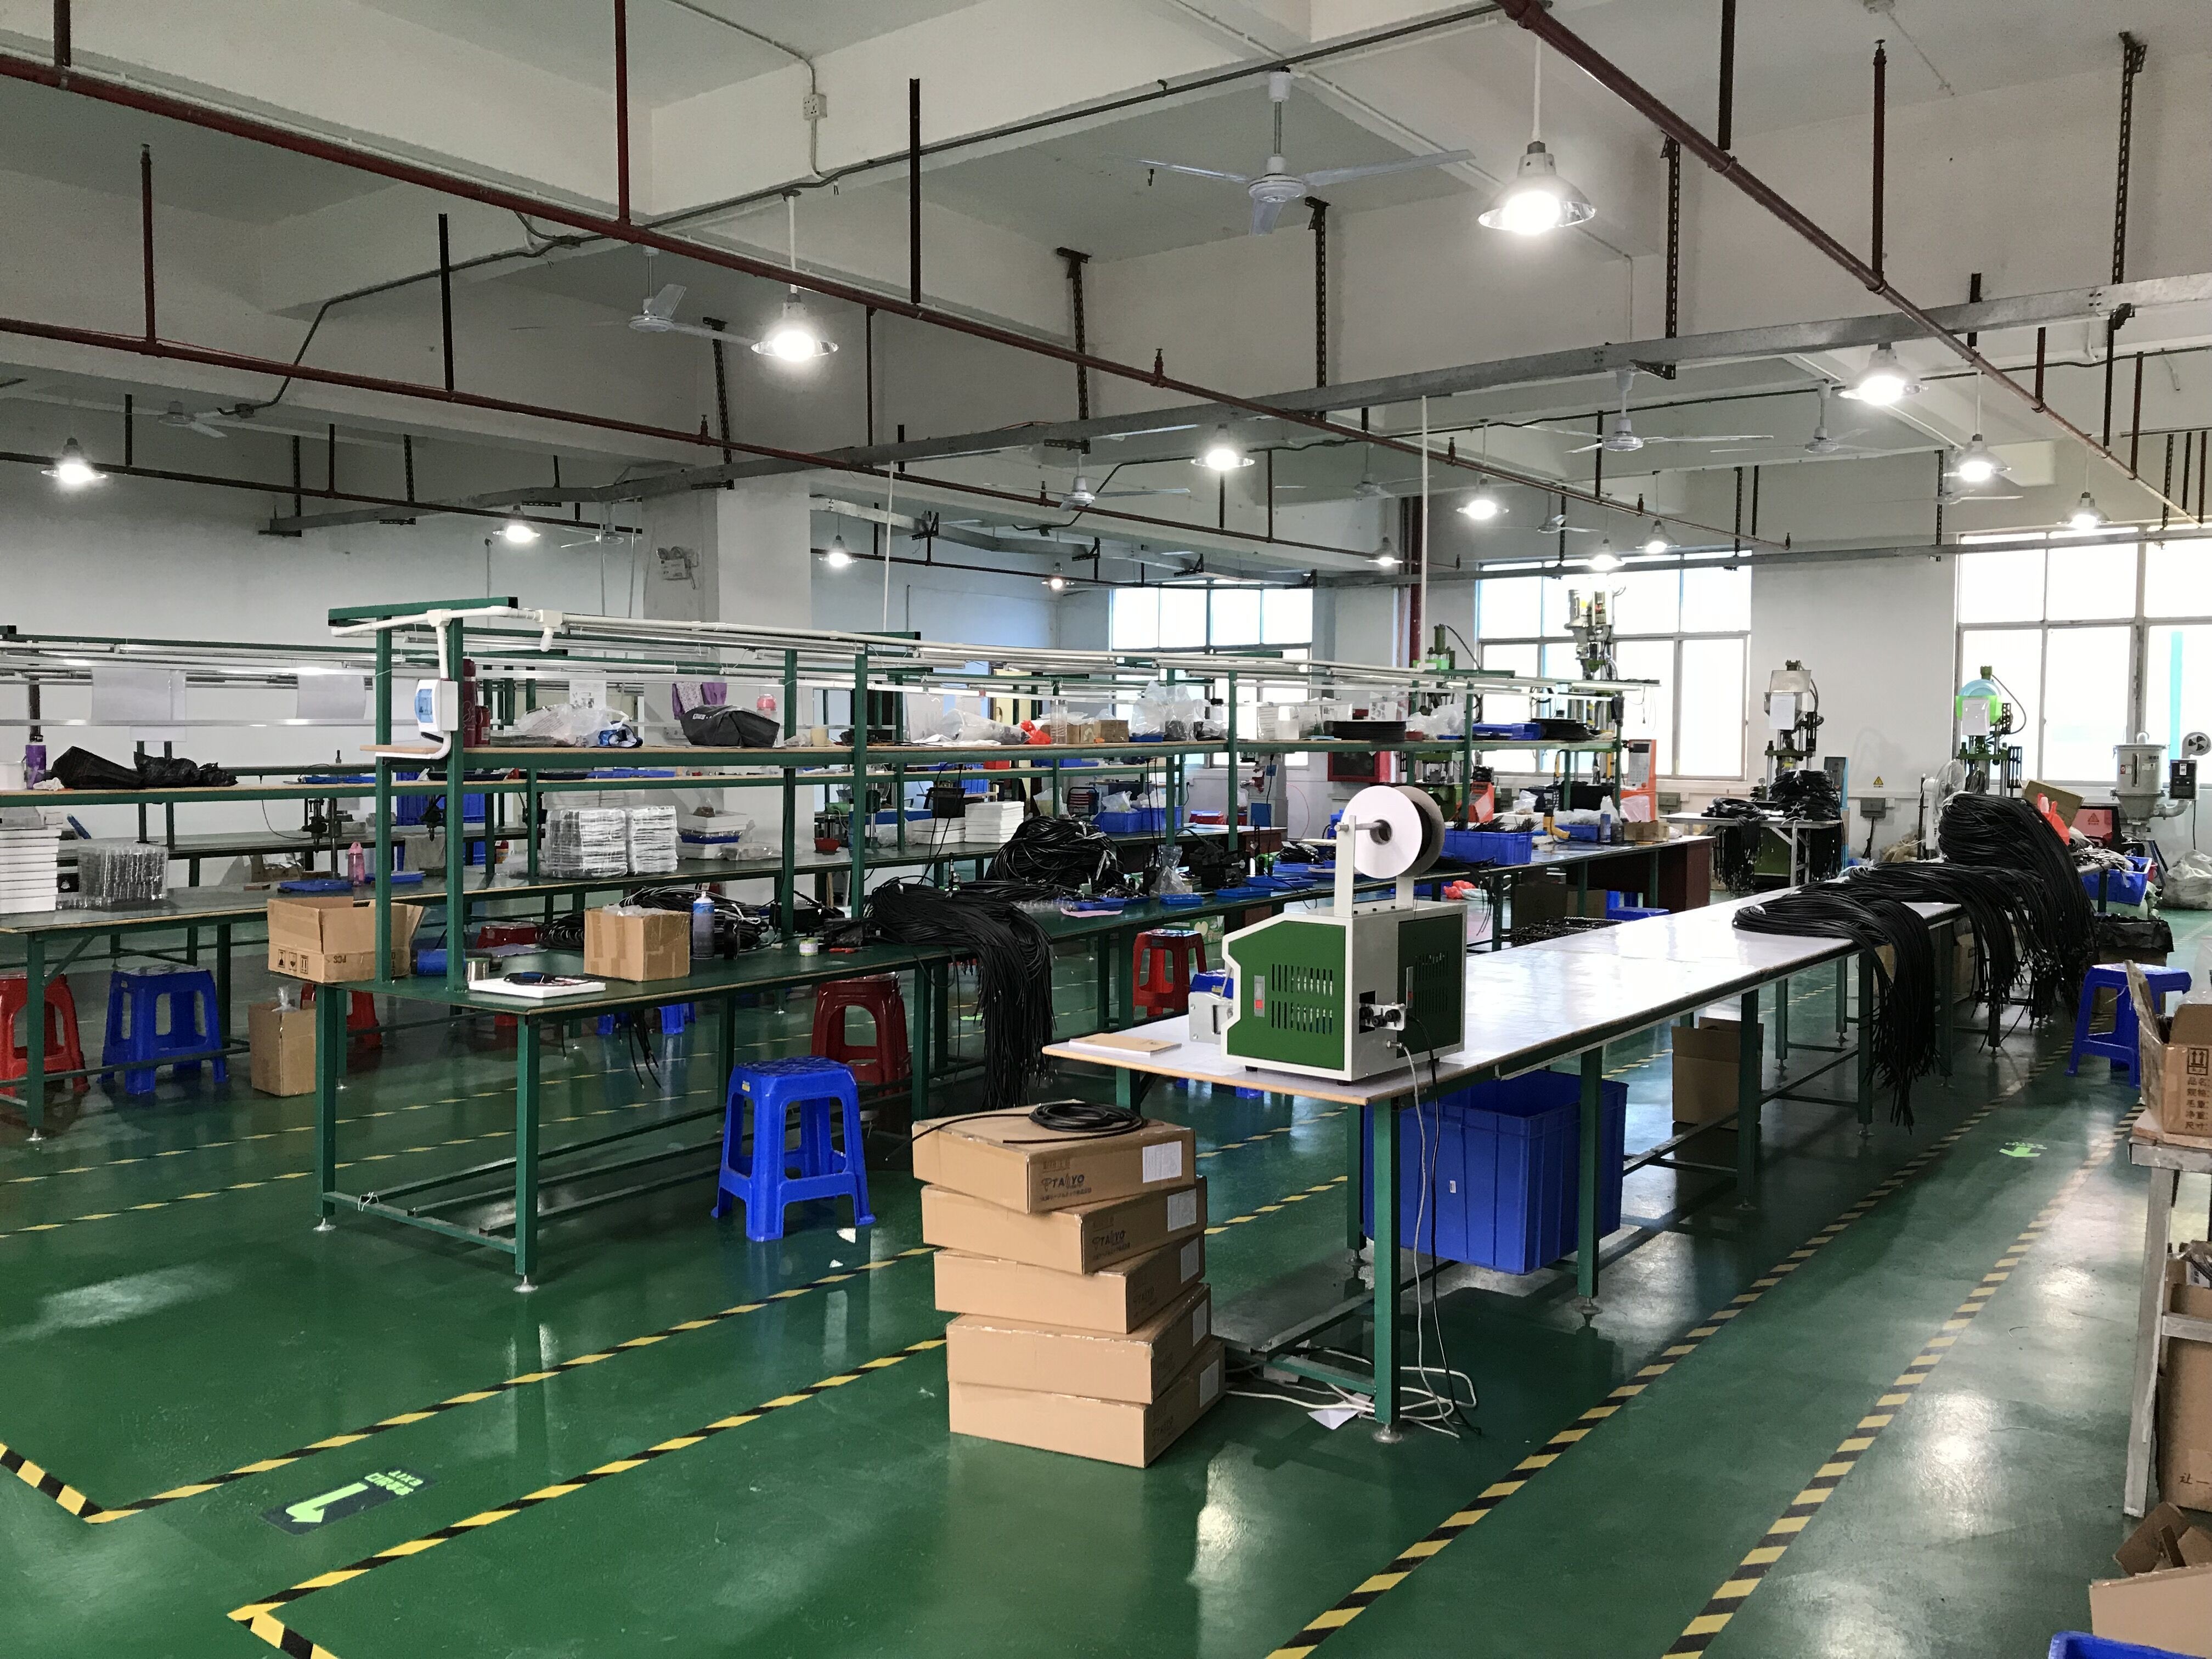 Shenzhen Easy Top Connect Technology Co., Ltd.